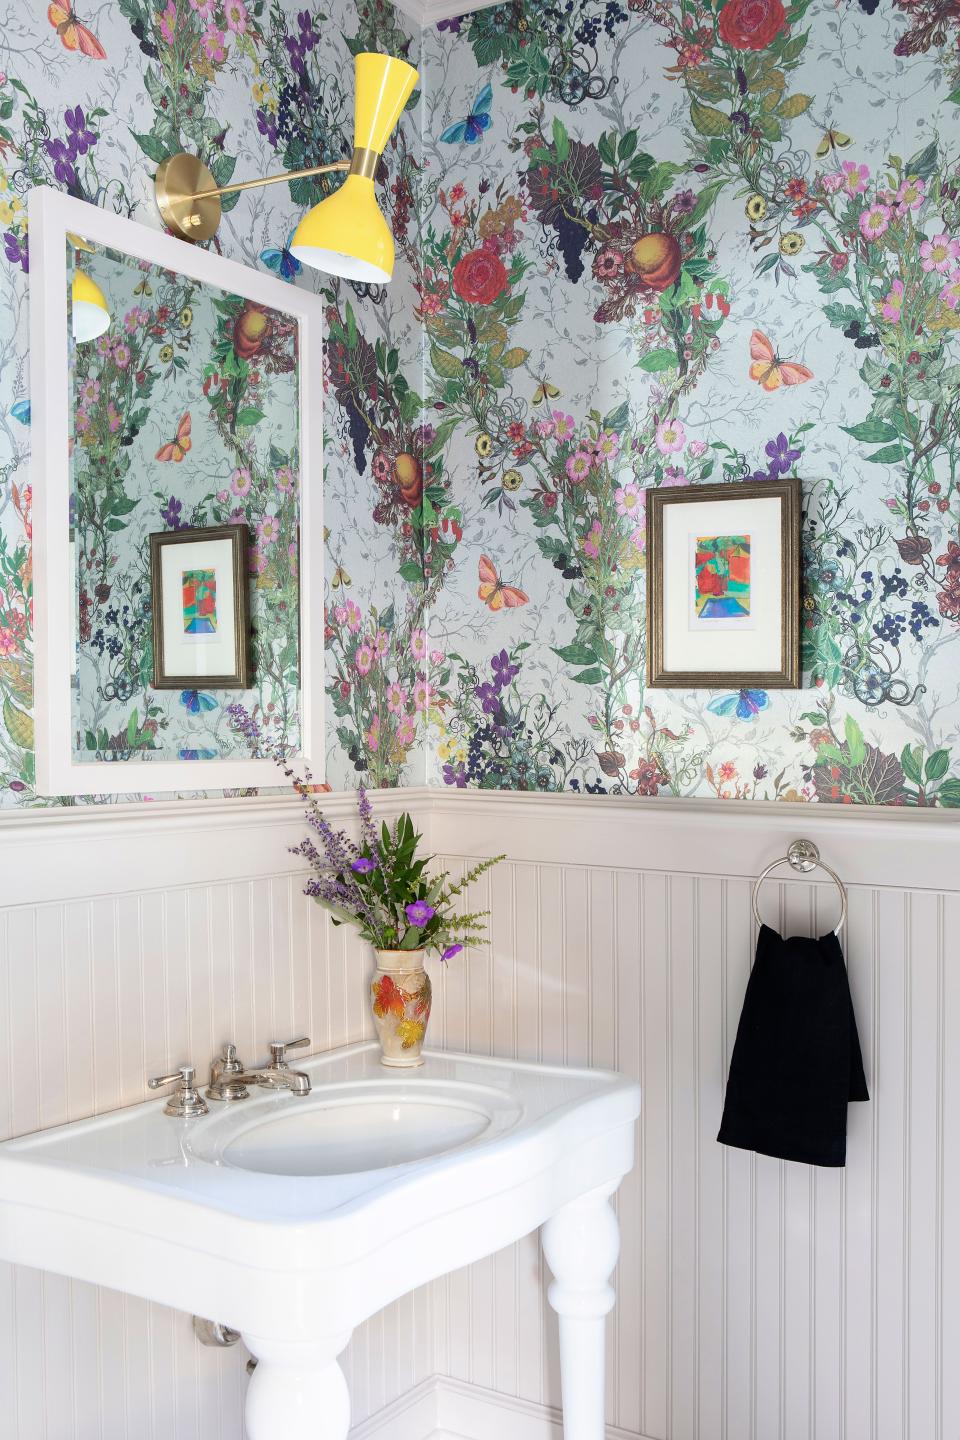 The wallpaper seen in this bathroom has a unique “scale and sensibility,” as Galli puts it. It’s “totally funky,” she adds.